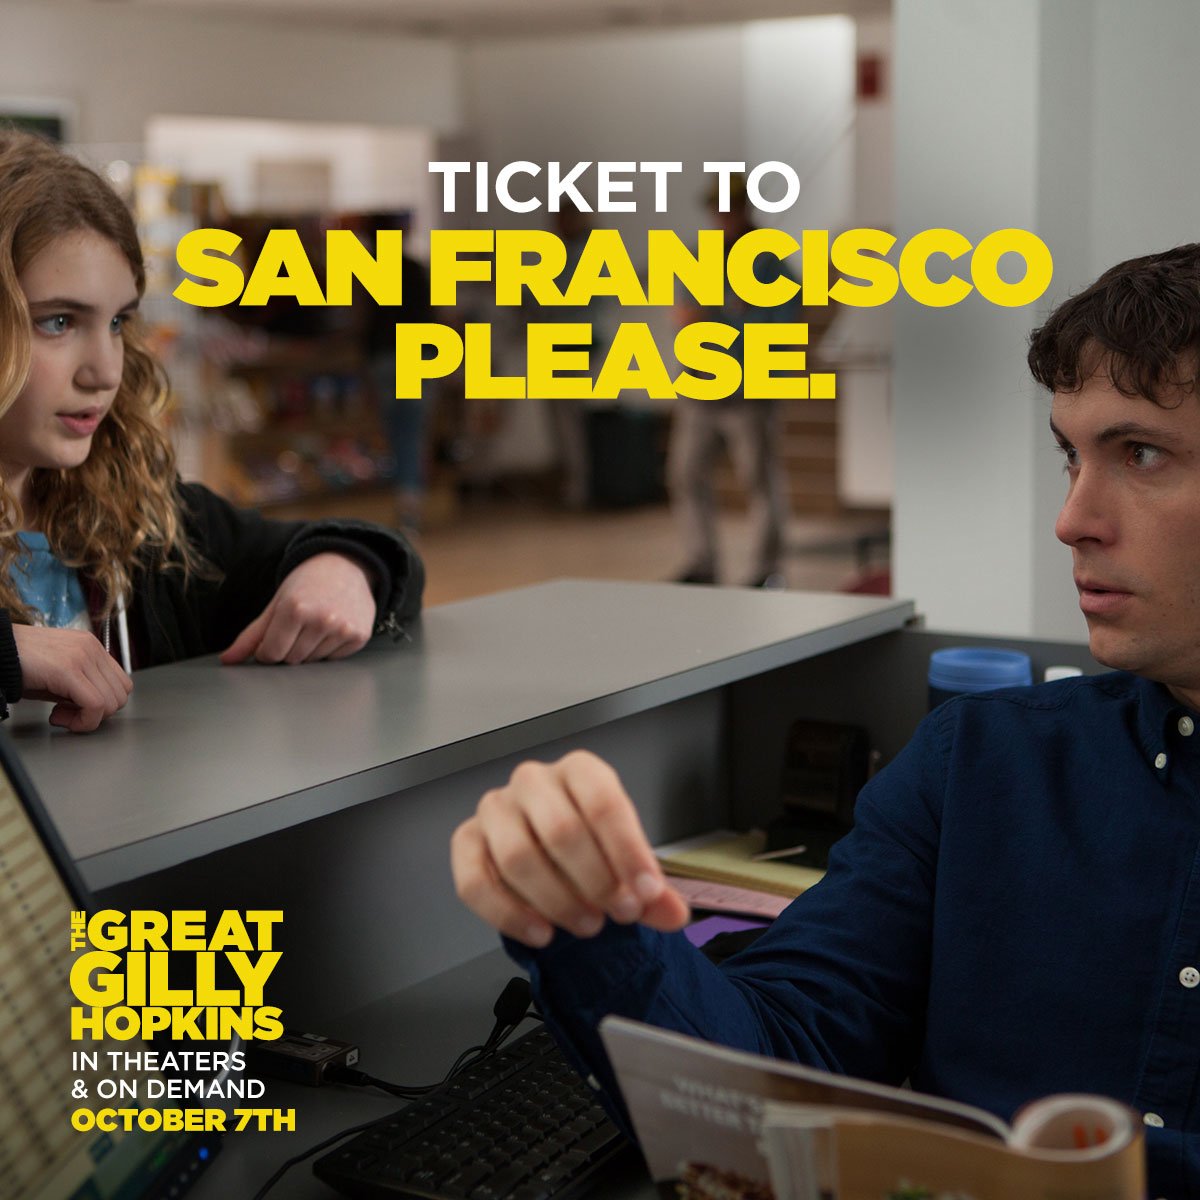 Gilly's trying to find her way home. See #SophieNelisse star in #TheGreatGillyHopkins, in theaters and on demand now!